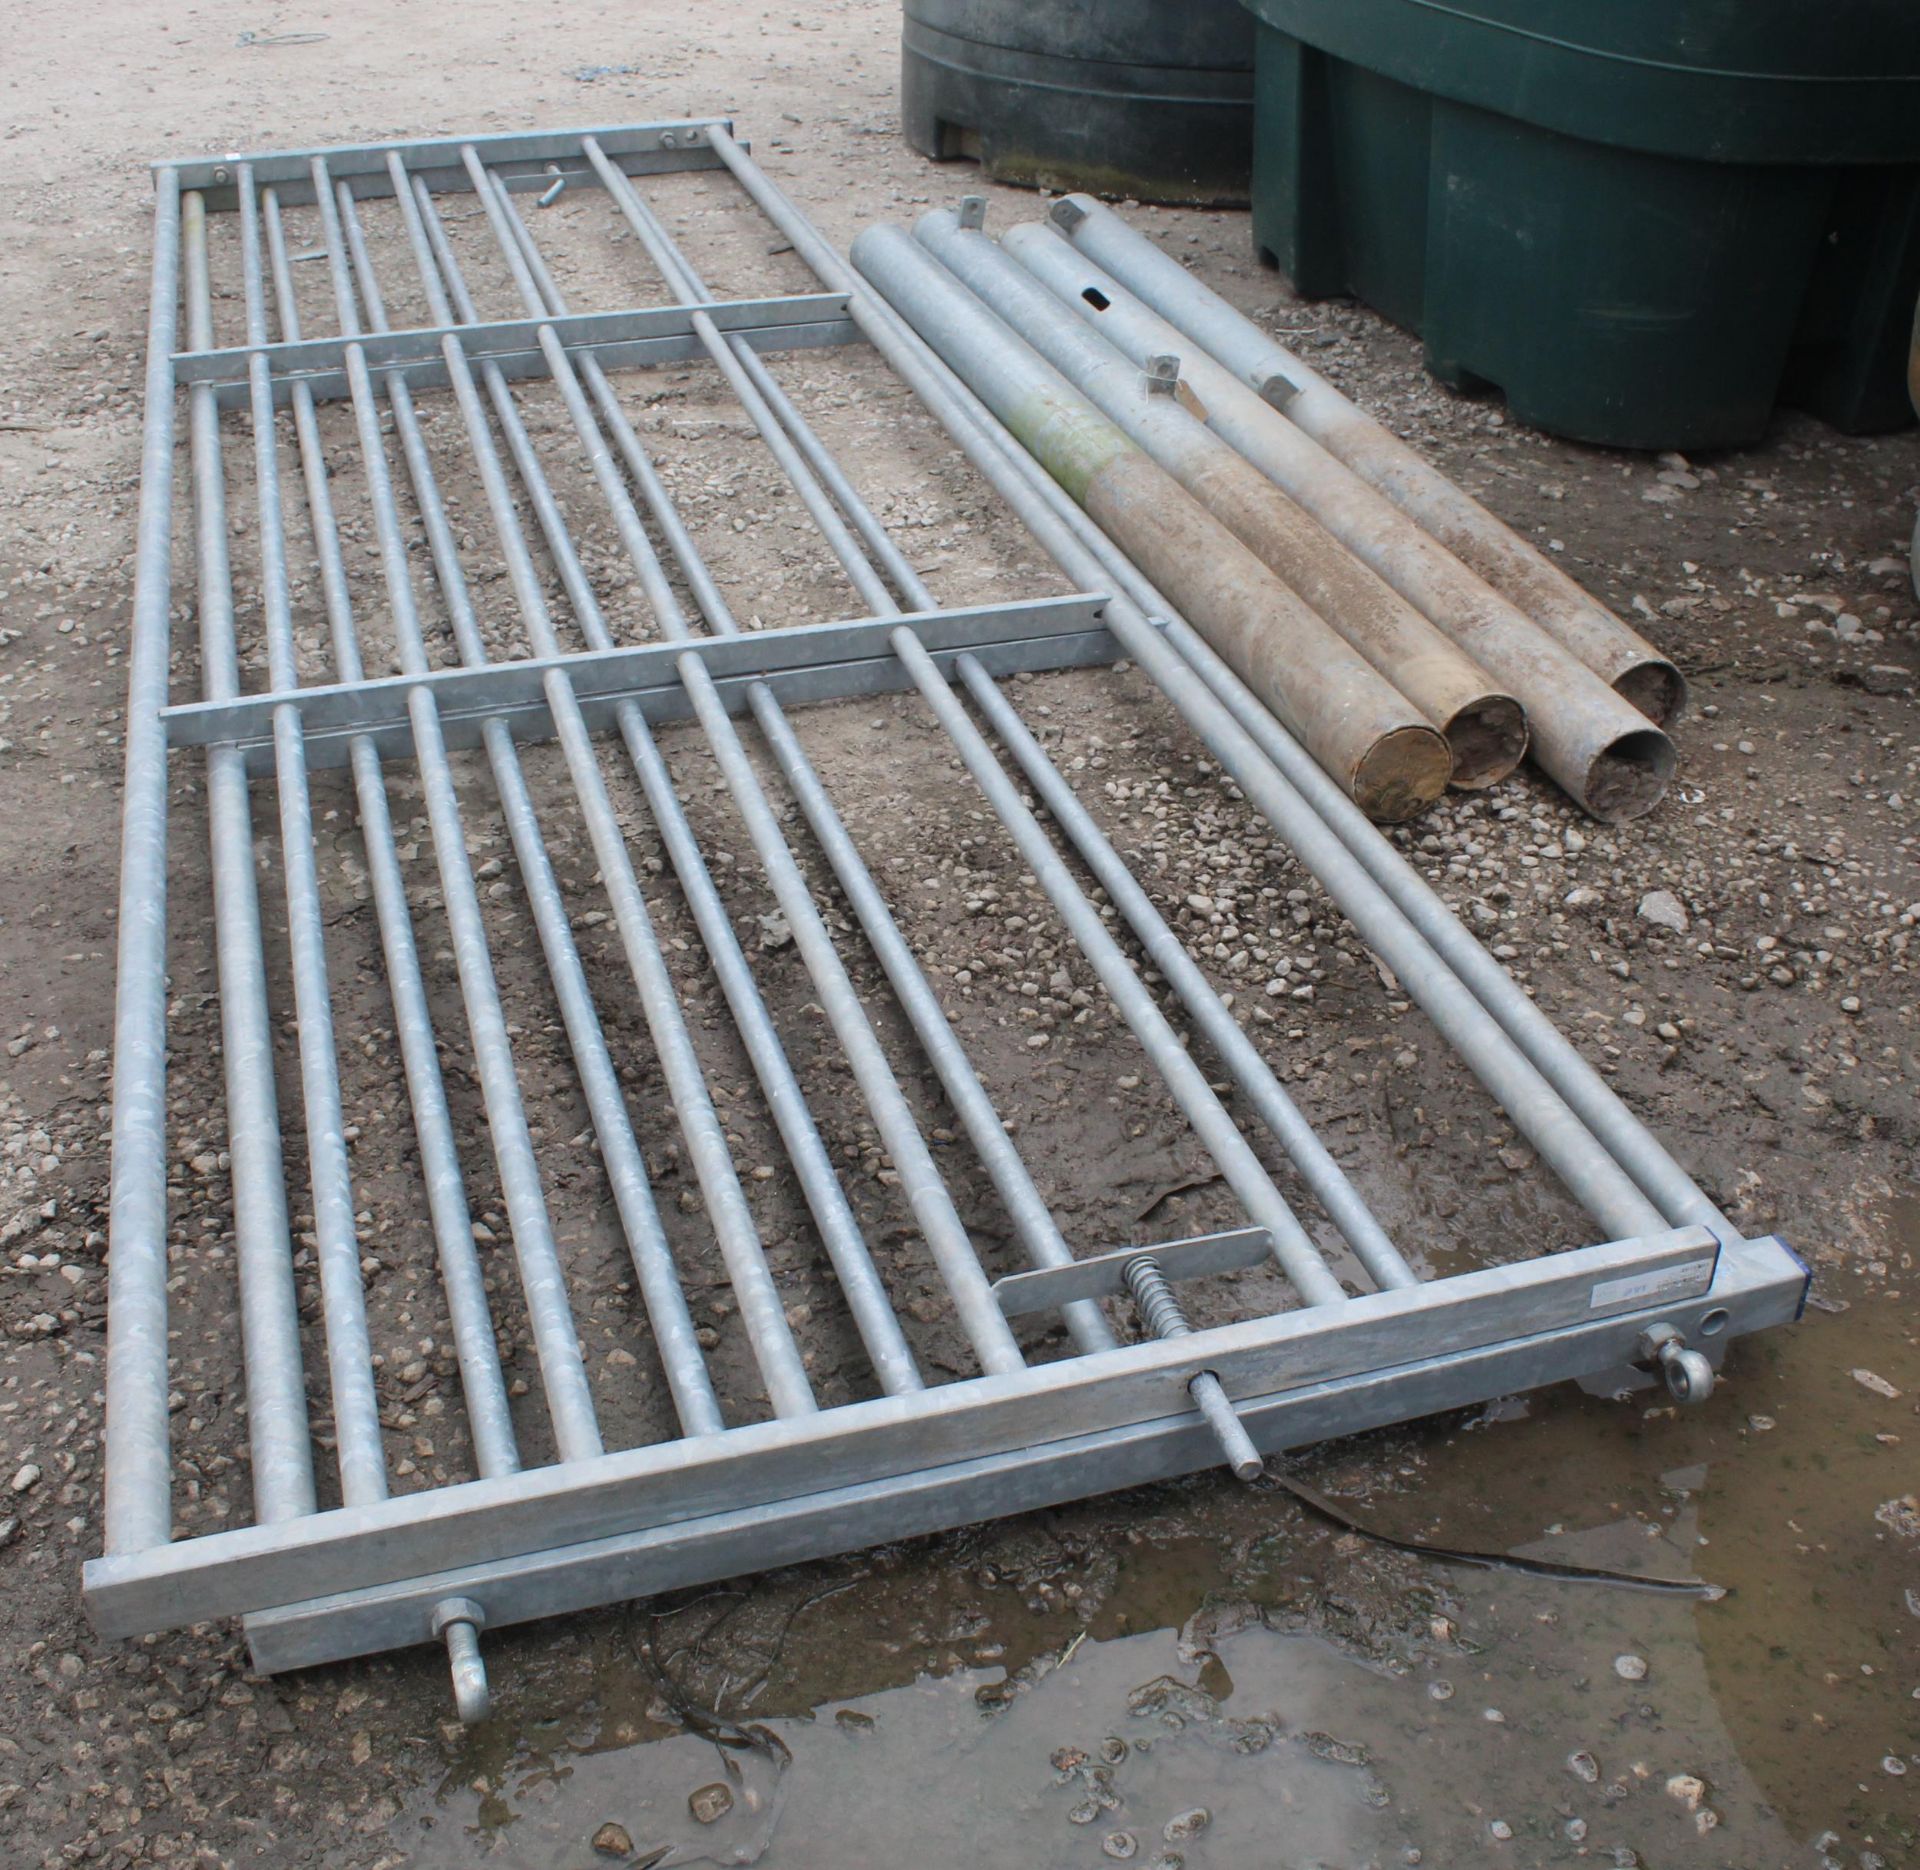 2 GATES 12 FT WITH 4 POSTS + VAT - Image 2 of 2